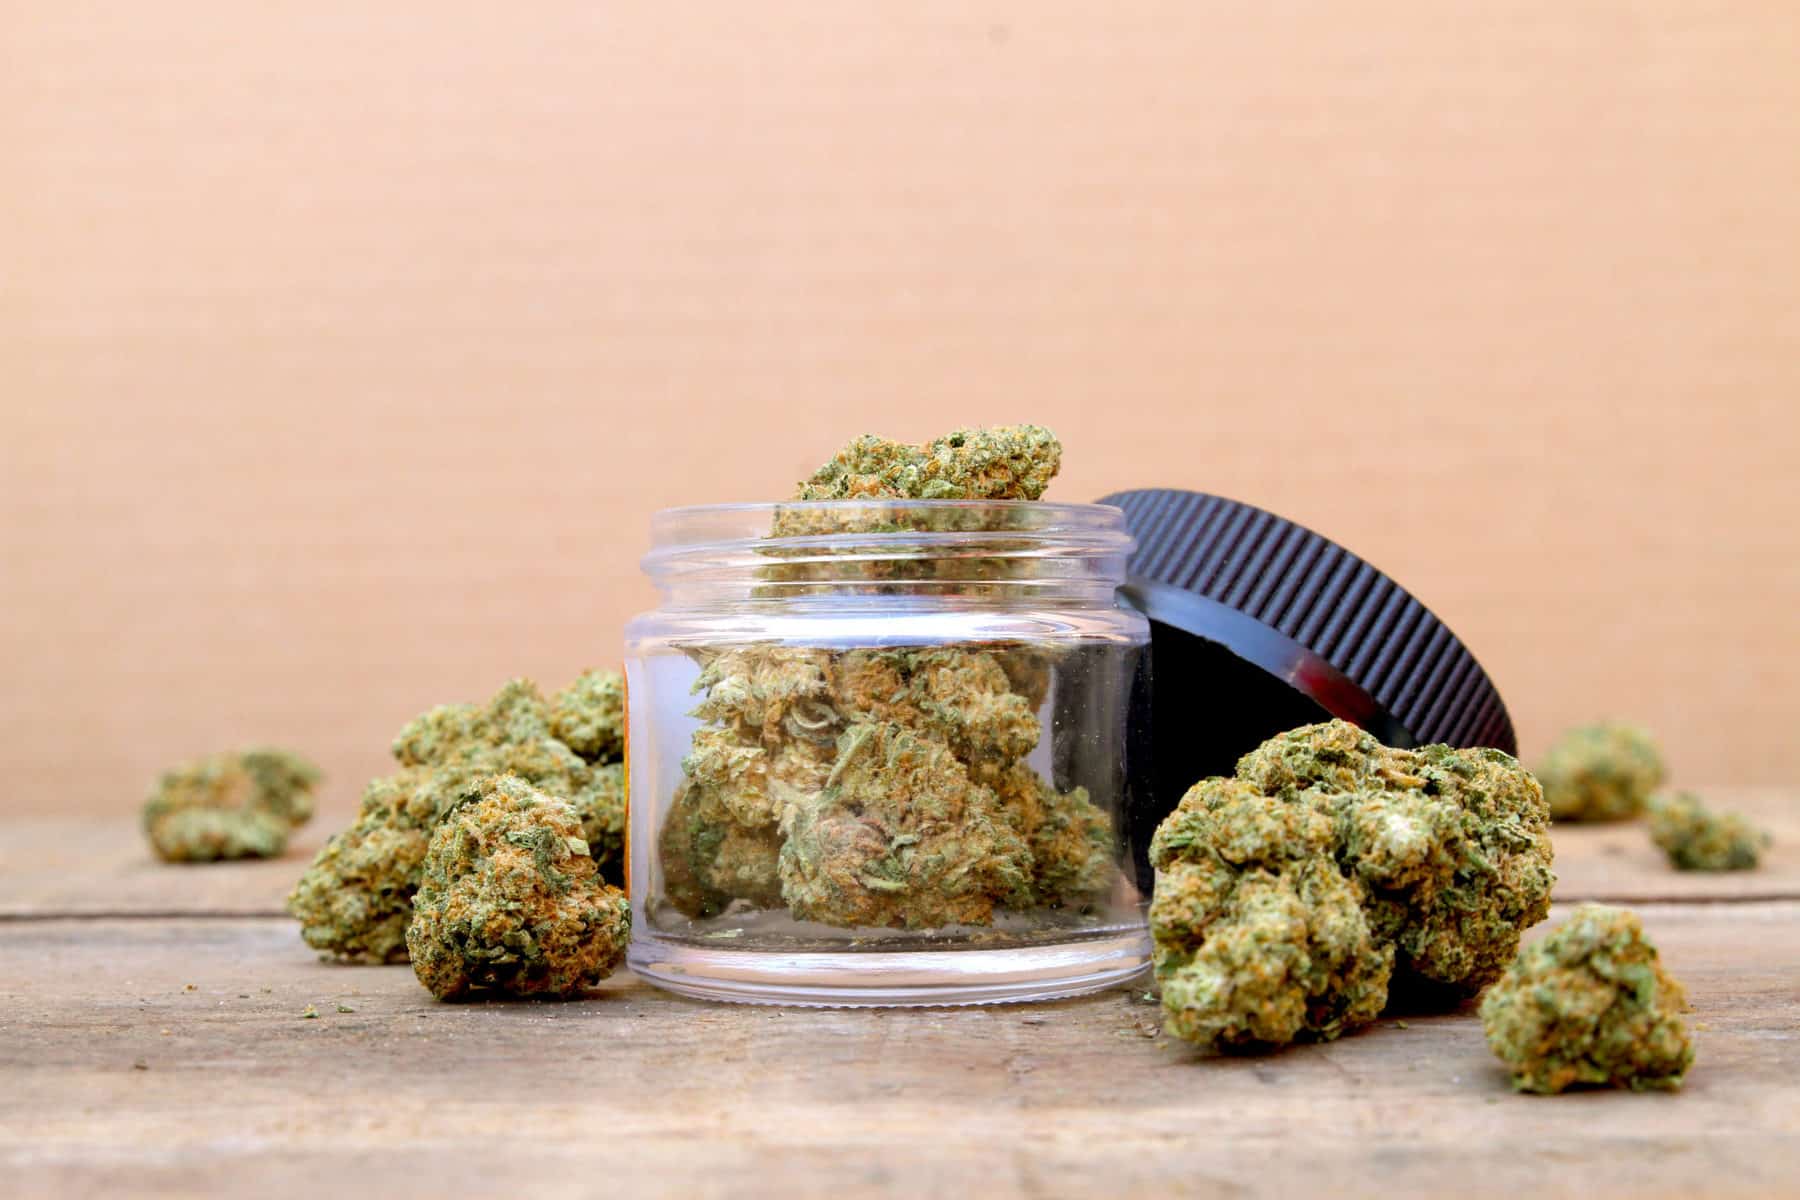 Marijuana in Open Jar Surrounded by Buds - Centered, cannabis pros and cons